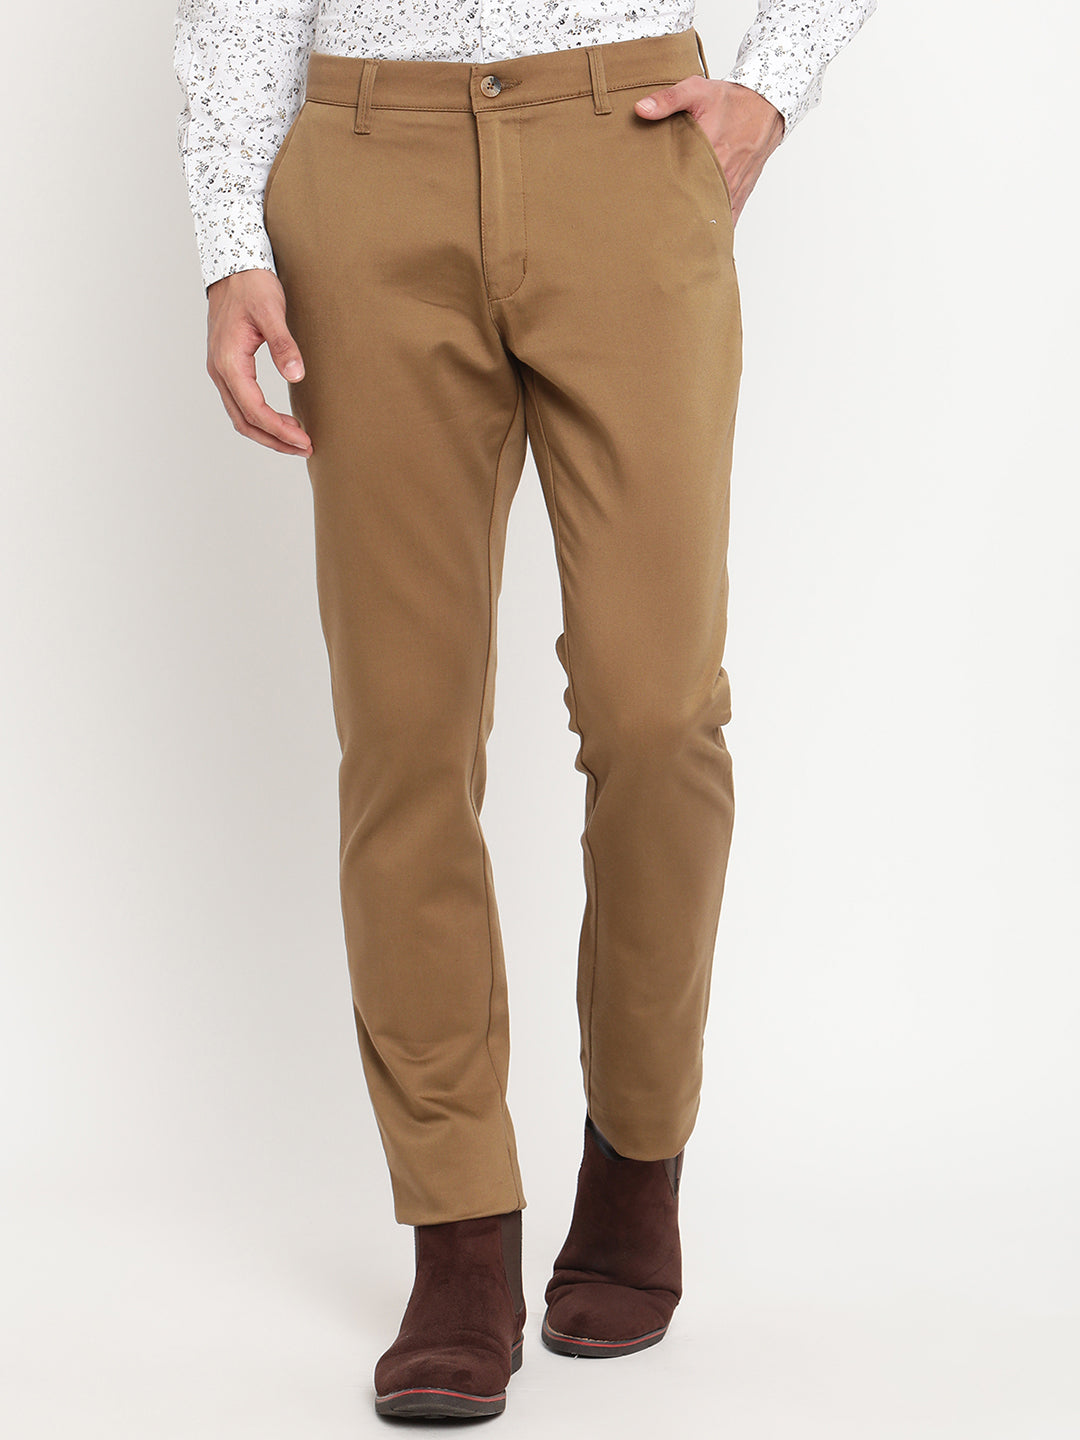 Mens Trouser Shopping  Buy Mens Trousers Online in India  G3 fashion